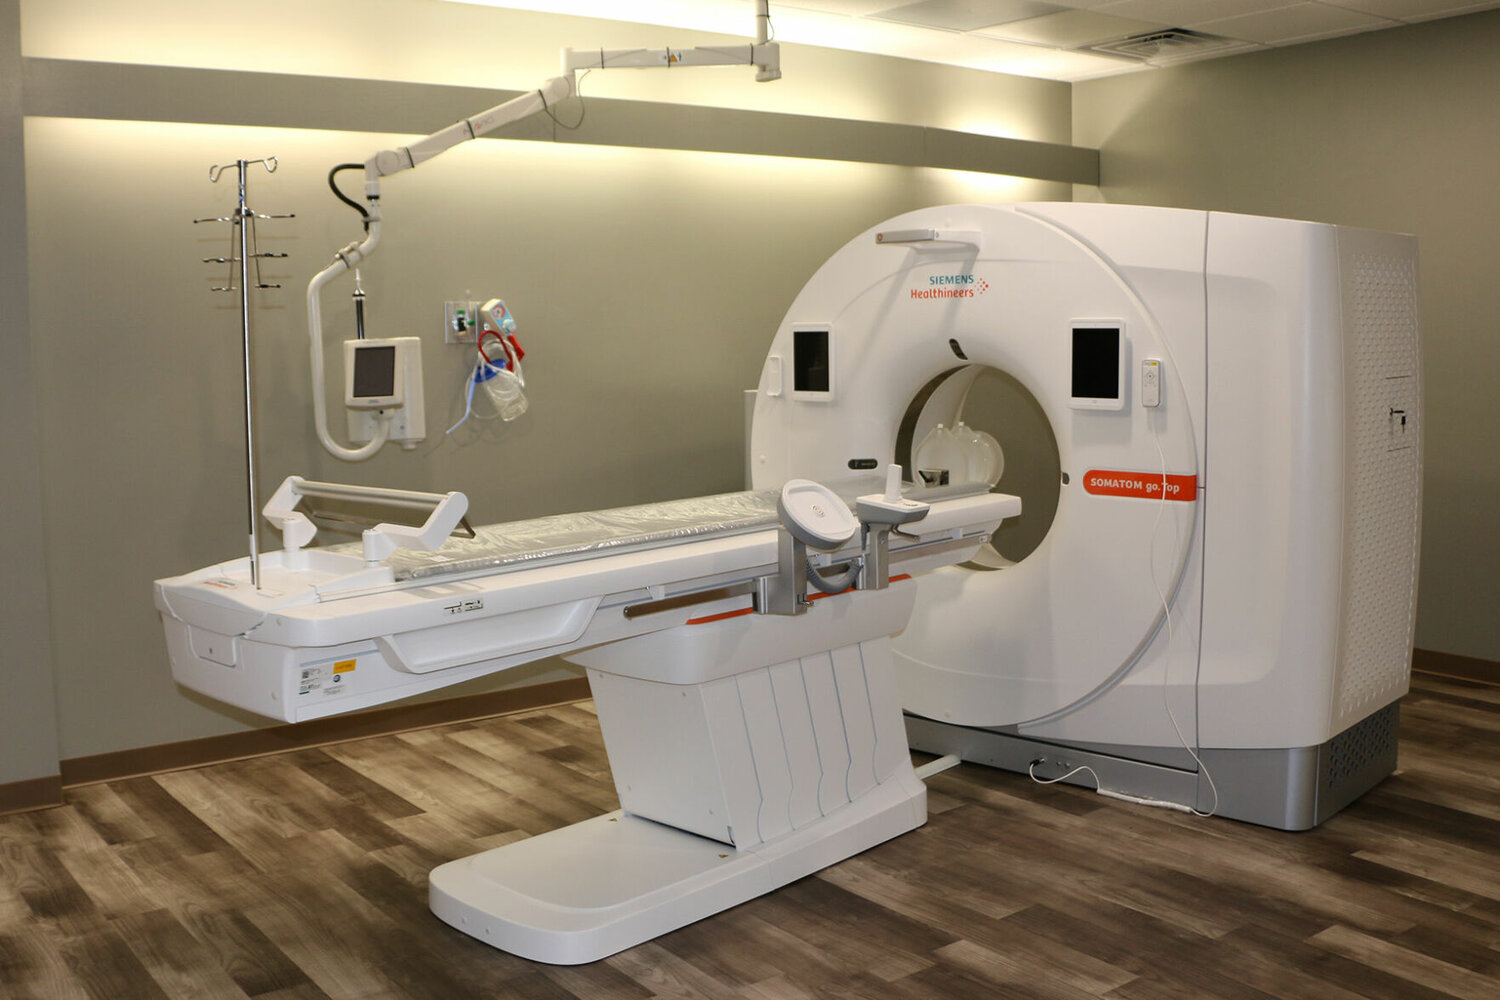 The 13-year-old CT scanner at Bothwell Regional Health Center was recently replaced with this new scanner that has a 128-slice configuration, which scans patients faster and with more detail. The Bothwell Foundation funded the new scanner, along with an upgrade of the scanner in the Oncology Department at the Susan O’Brien Fischer Cancer Center.